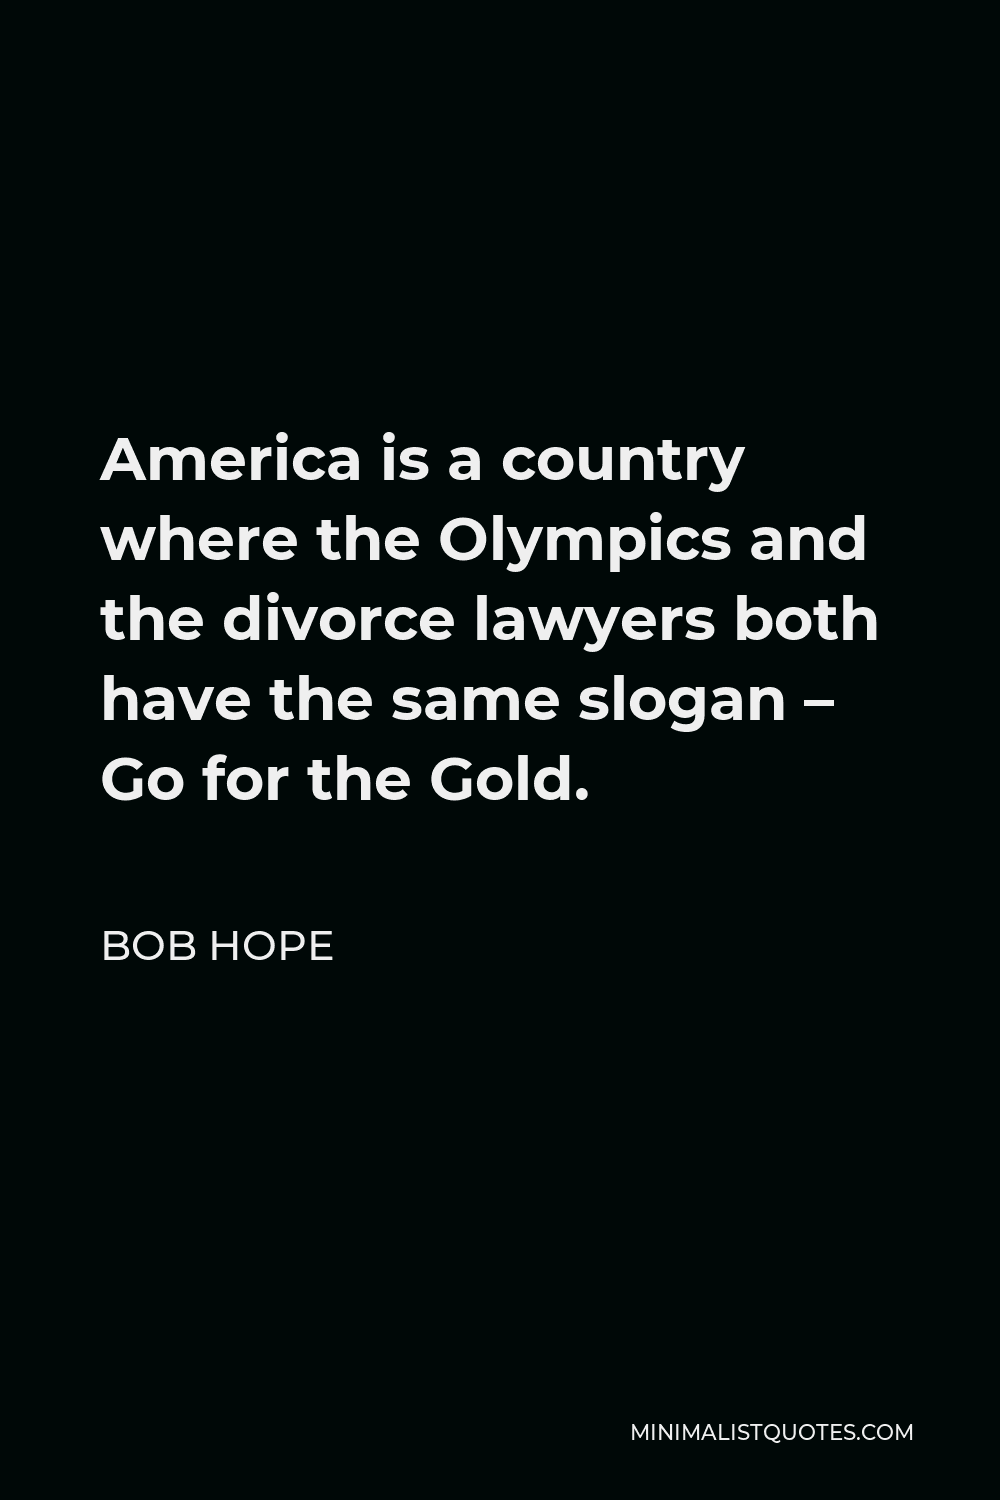 Bob Hope Quote - America is a country where the Olympics and the divorce lawyers both have the same slogan – Go for the Gold.